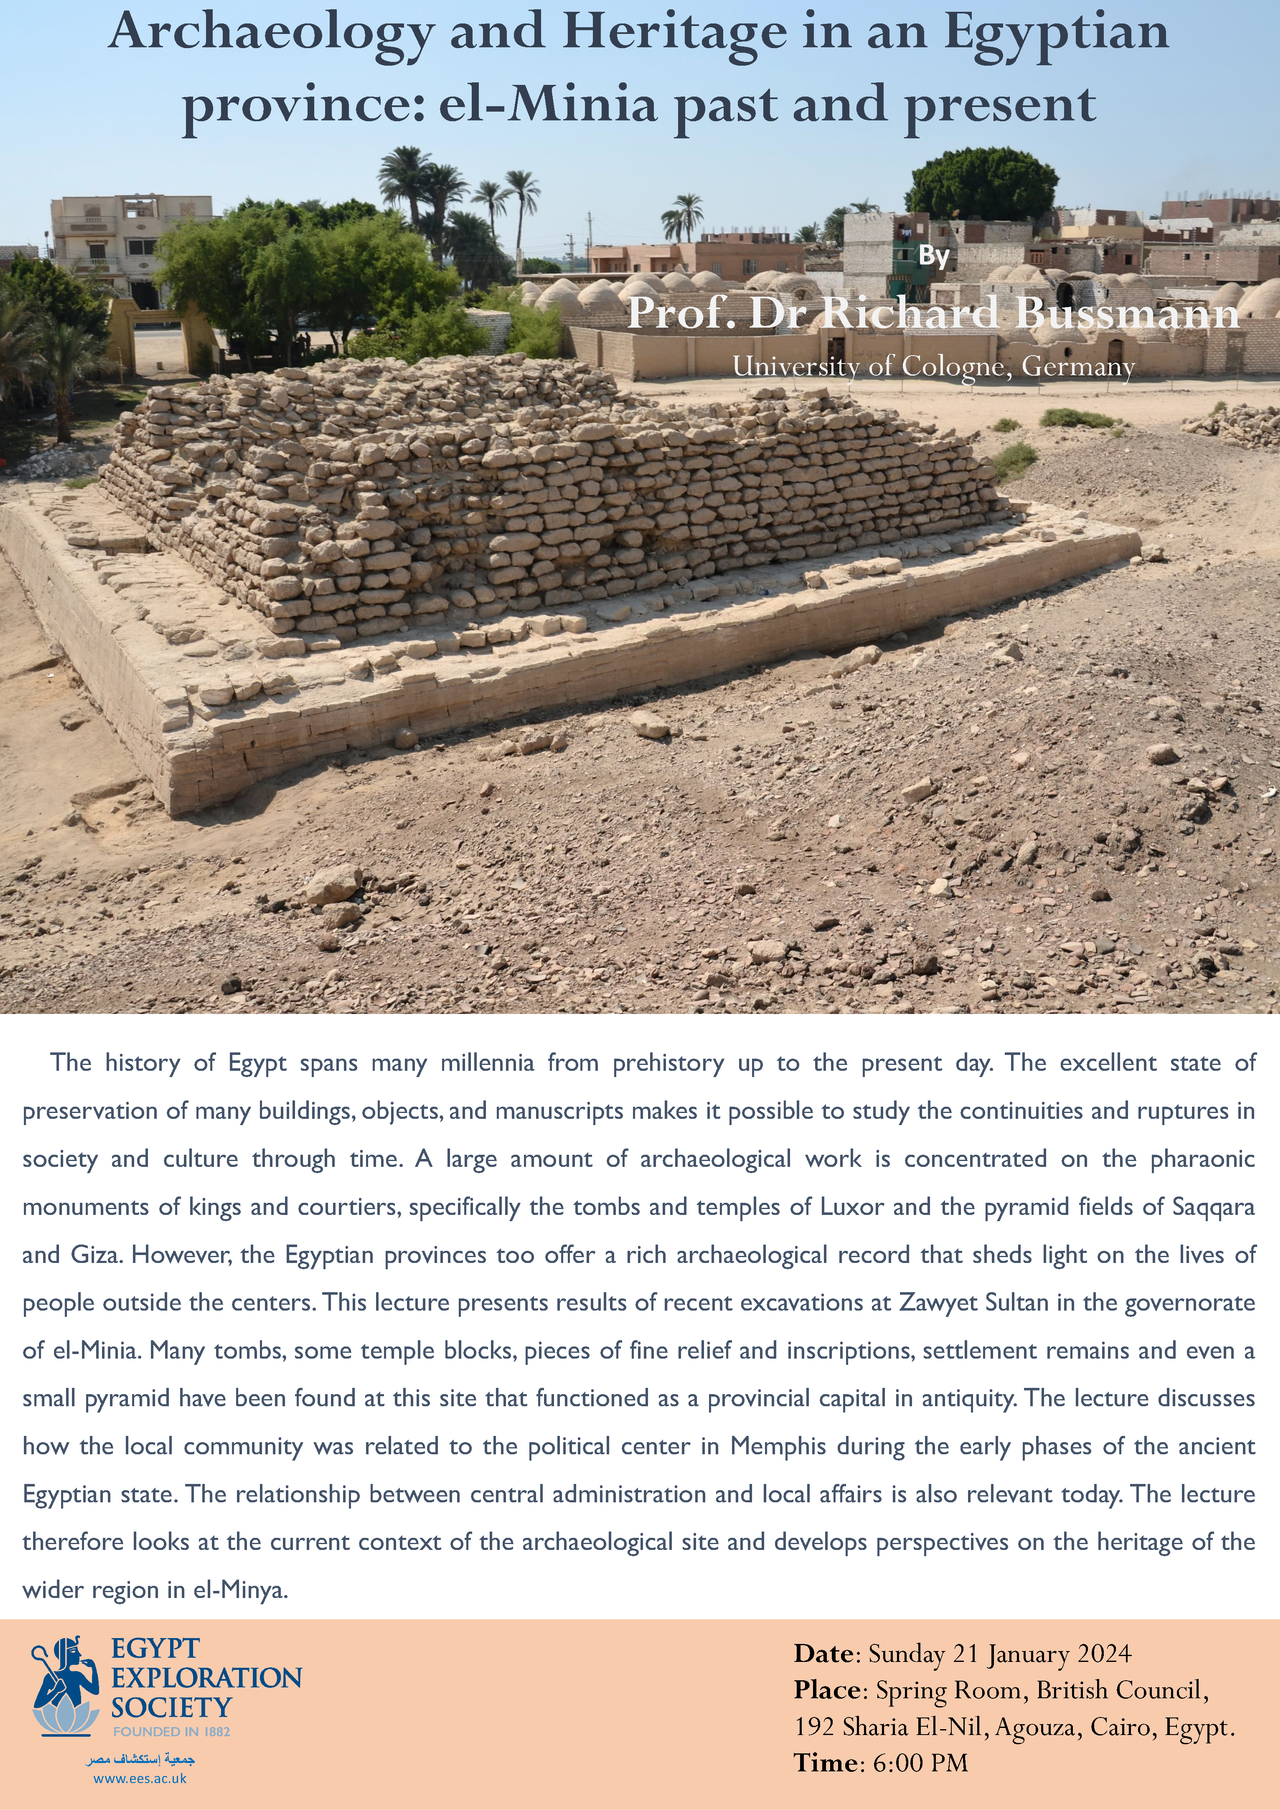 24 01 21 Bussmann_Archaeology and heritage in el-Minia.png